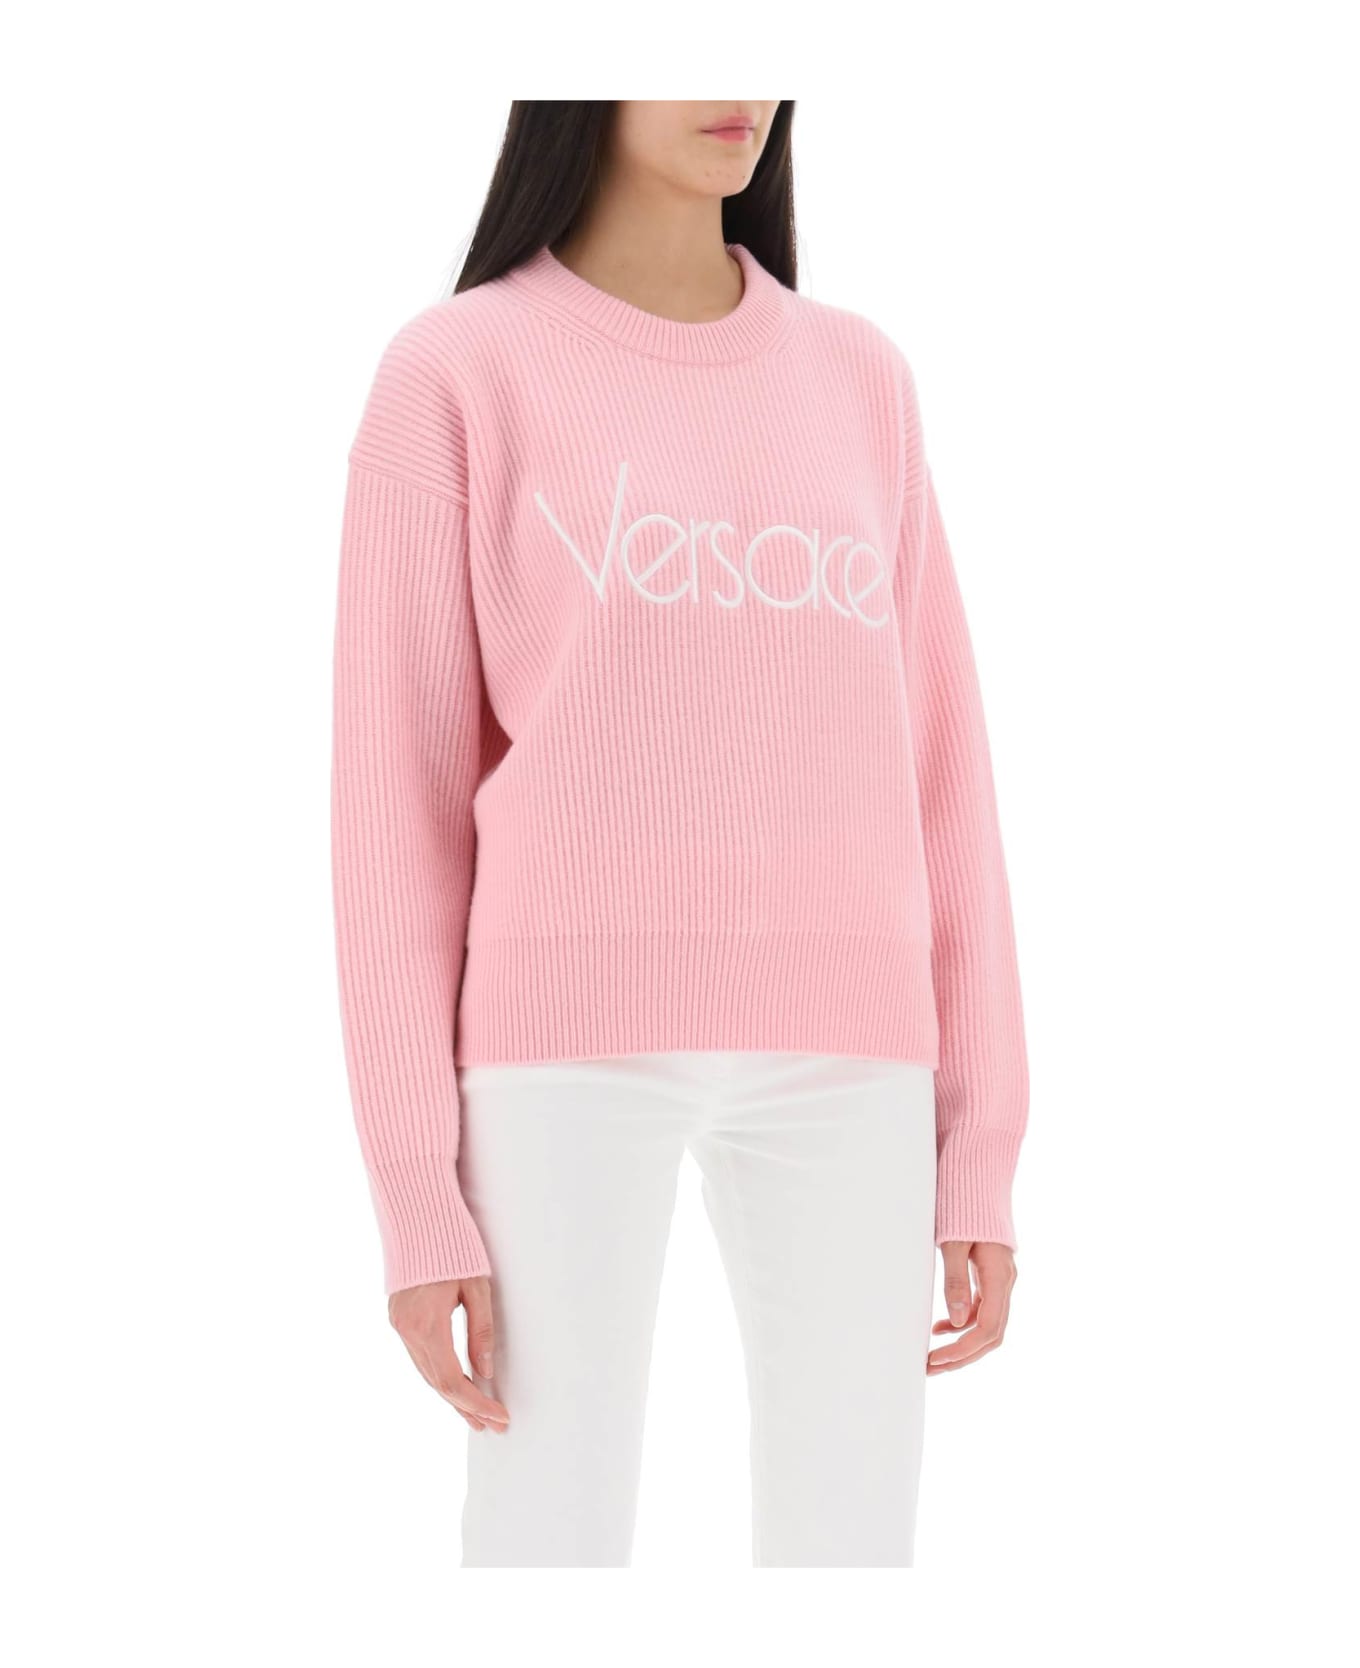 Versace 1978 Re-edition Logo Jersey - PALE PINK (Pink)